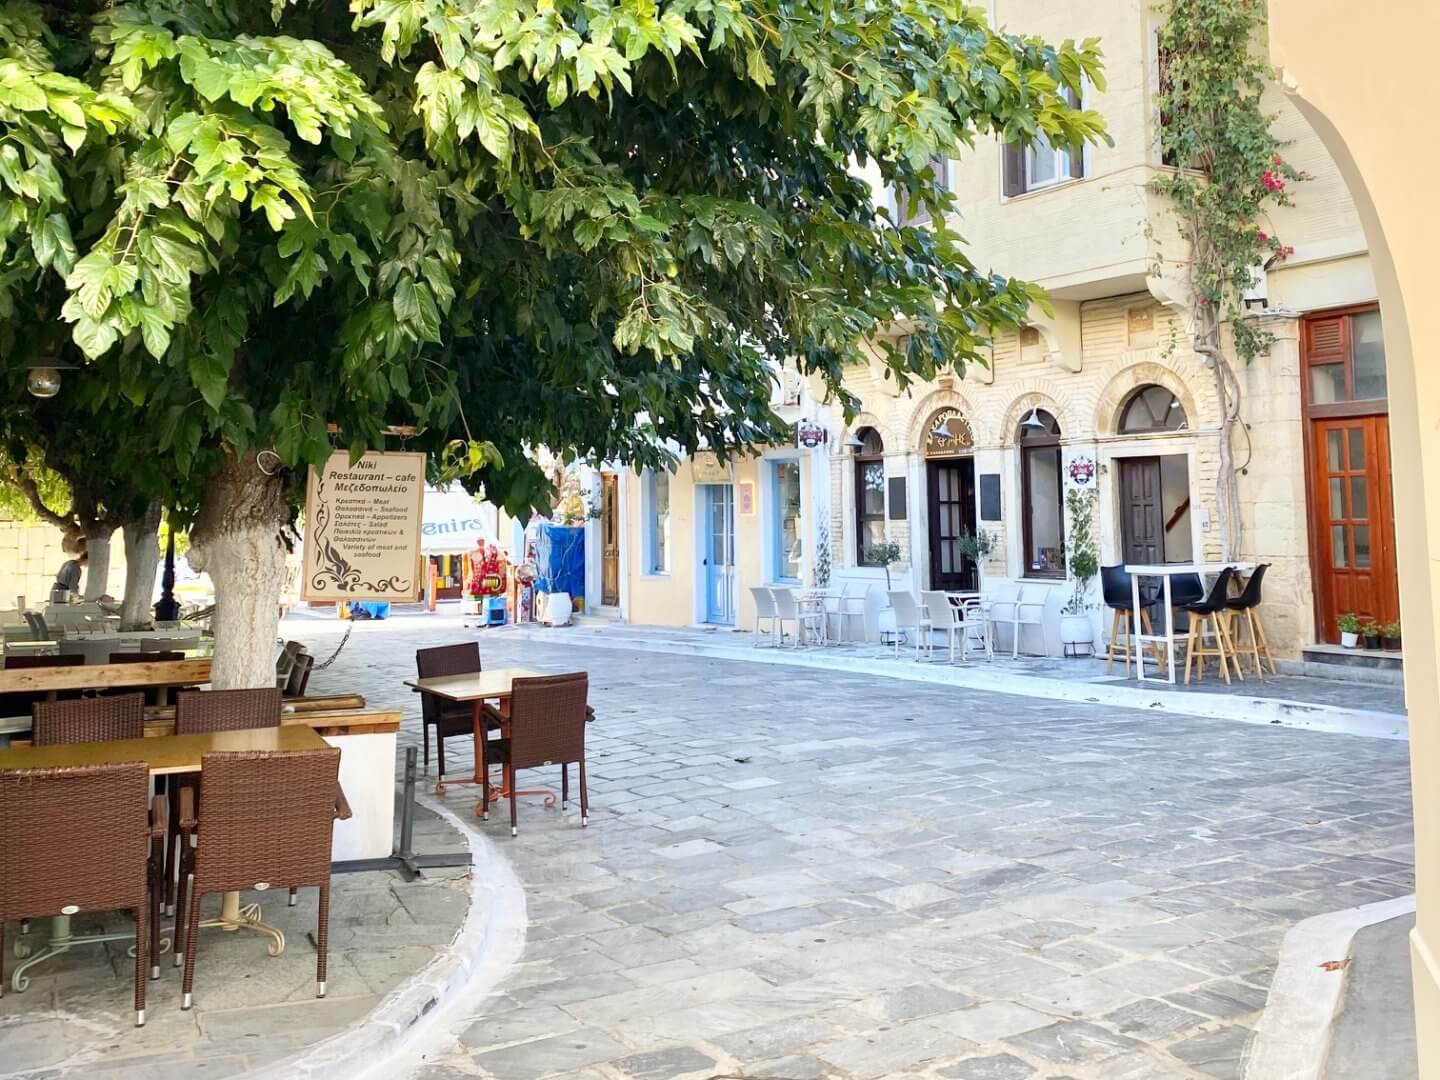 Square with cafe tables and chairs on the street and under plane tree - example of Where To Eat In Andros